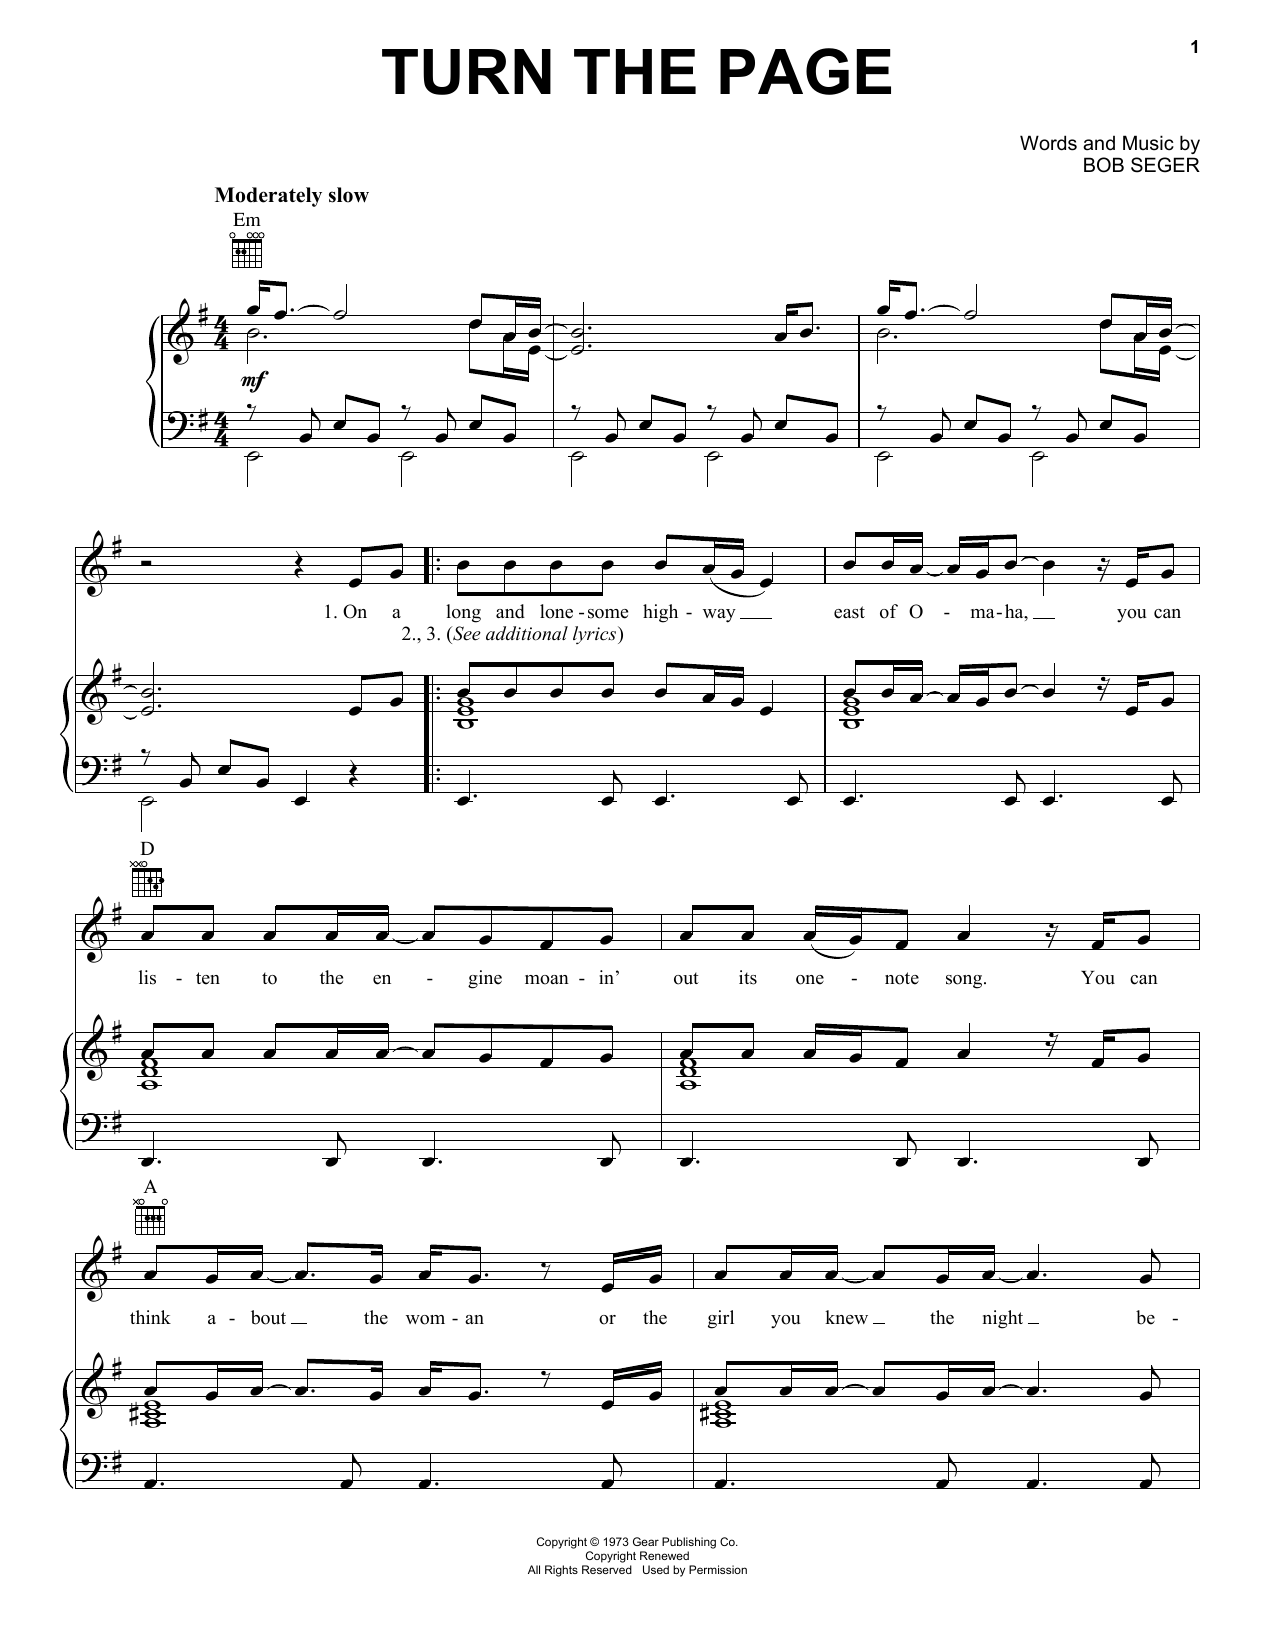 Bob Seger Turn The Page sheet music notes and chords. Download Printable PDF.